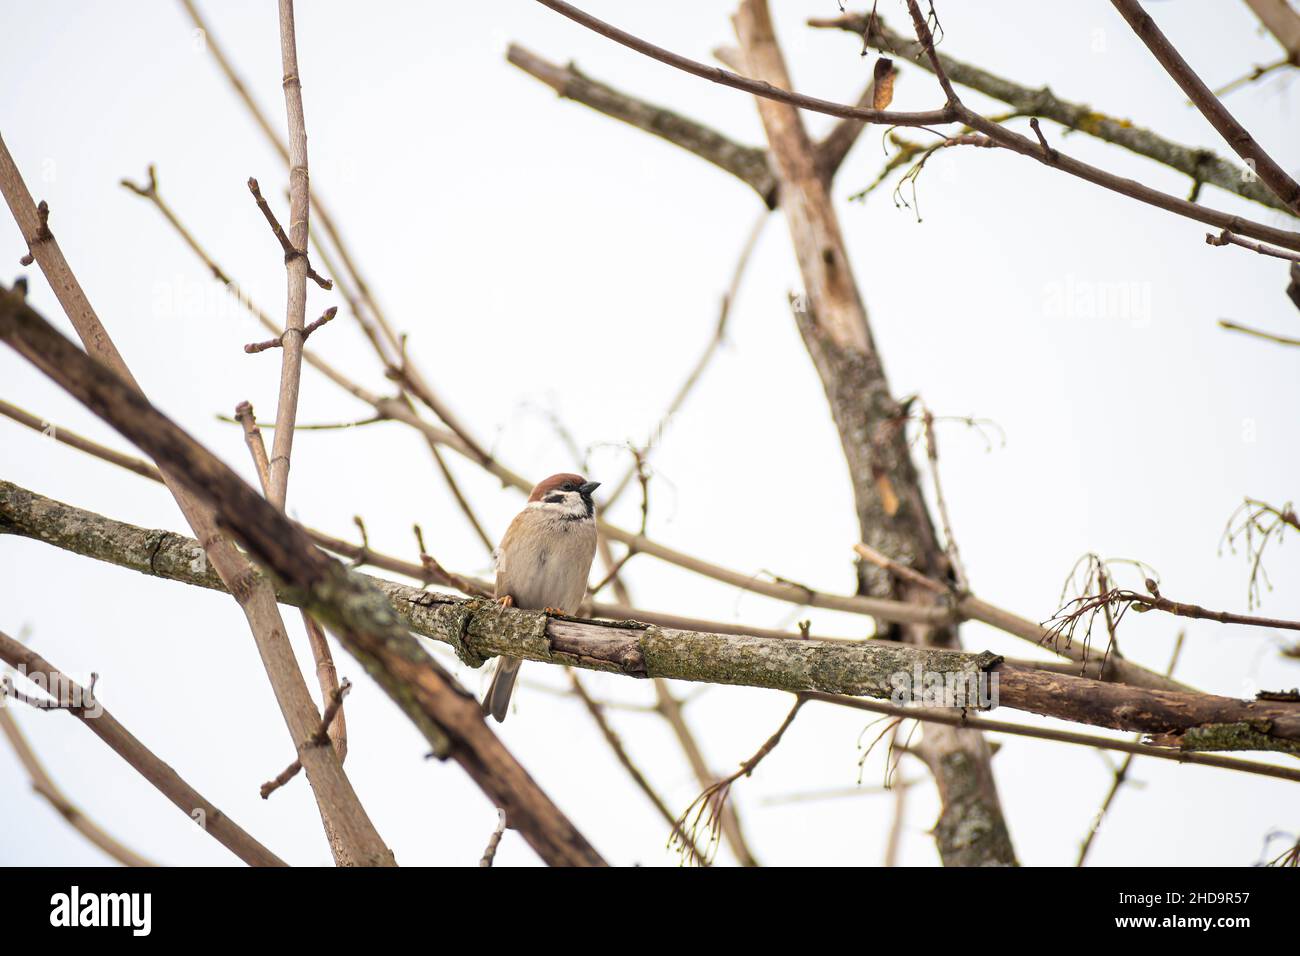 Closeup shot of a tiny Parus Palustris bird sitting on a thin withered branch Stock Photo